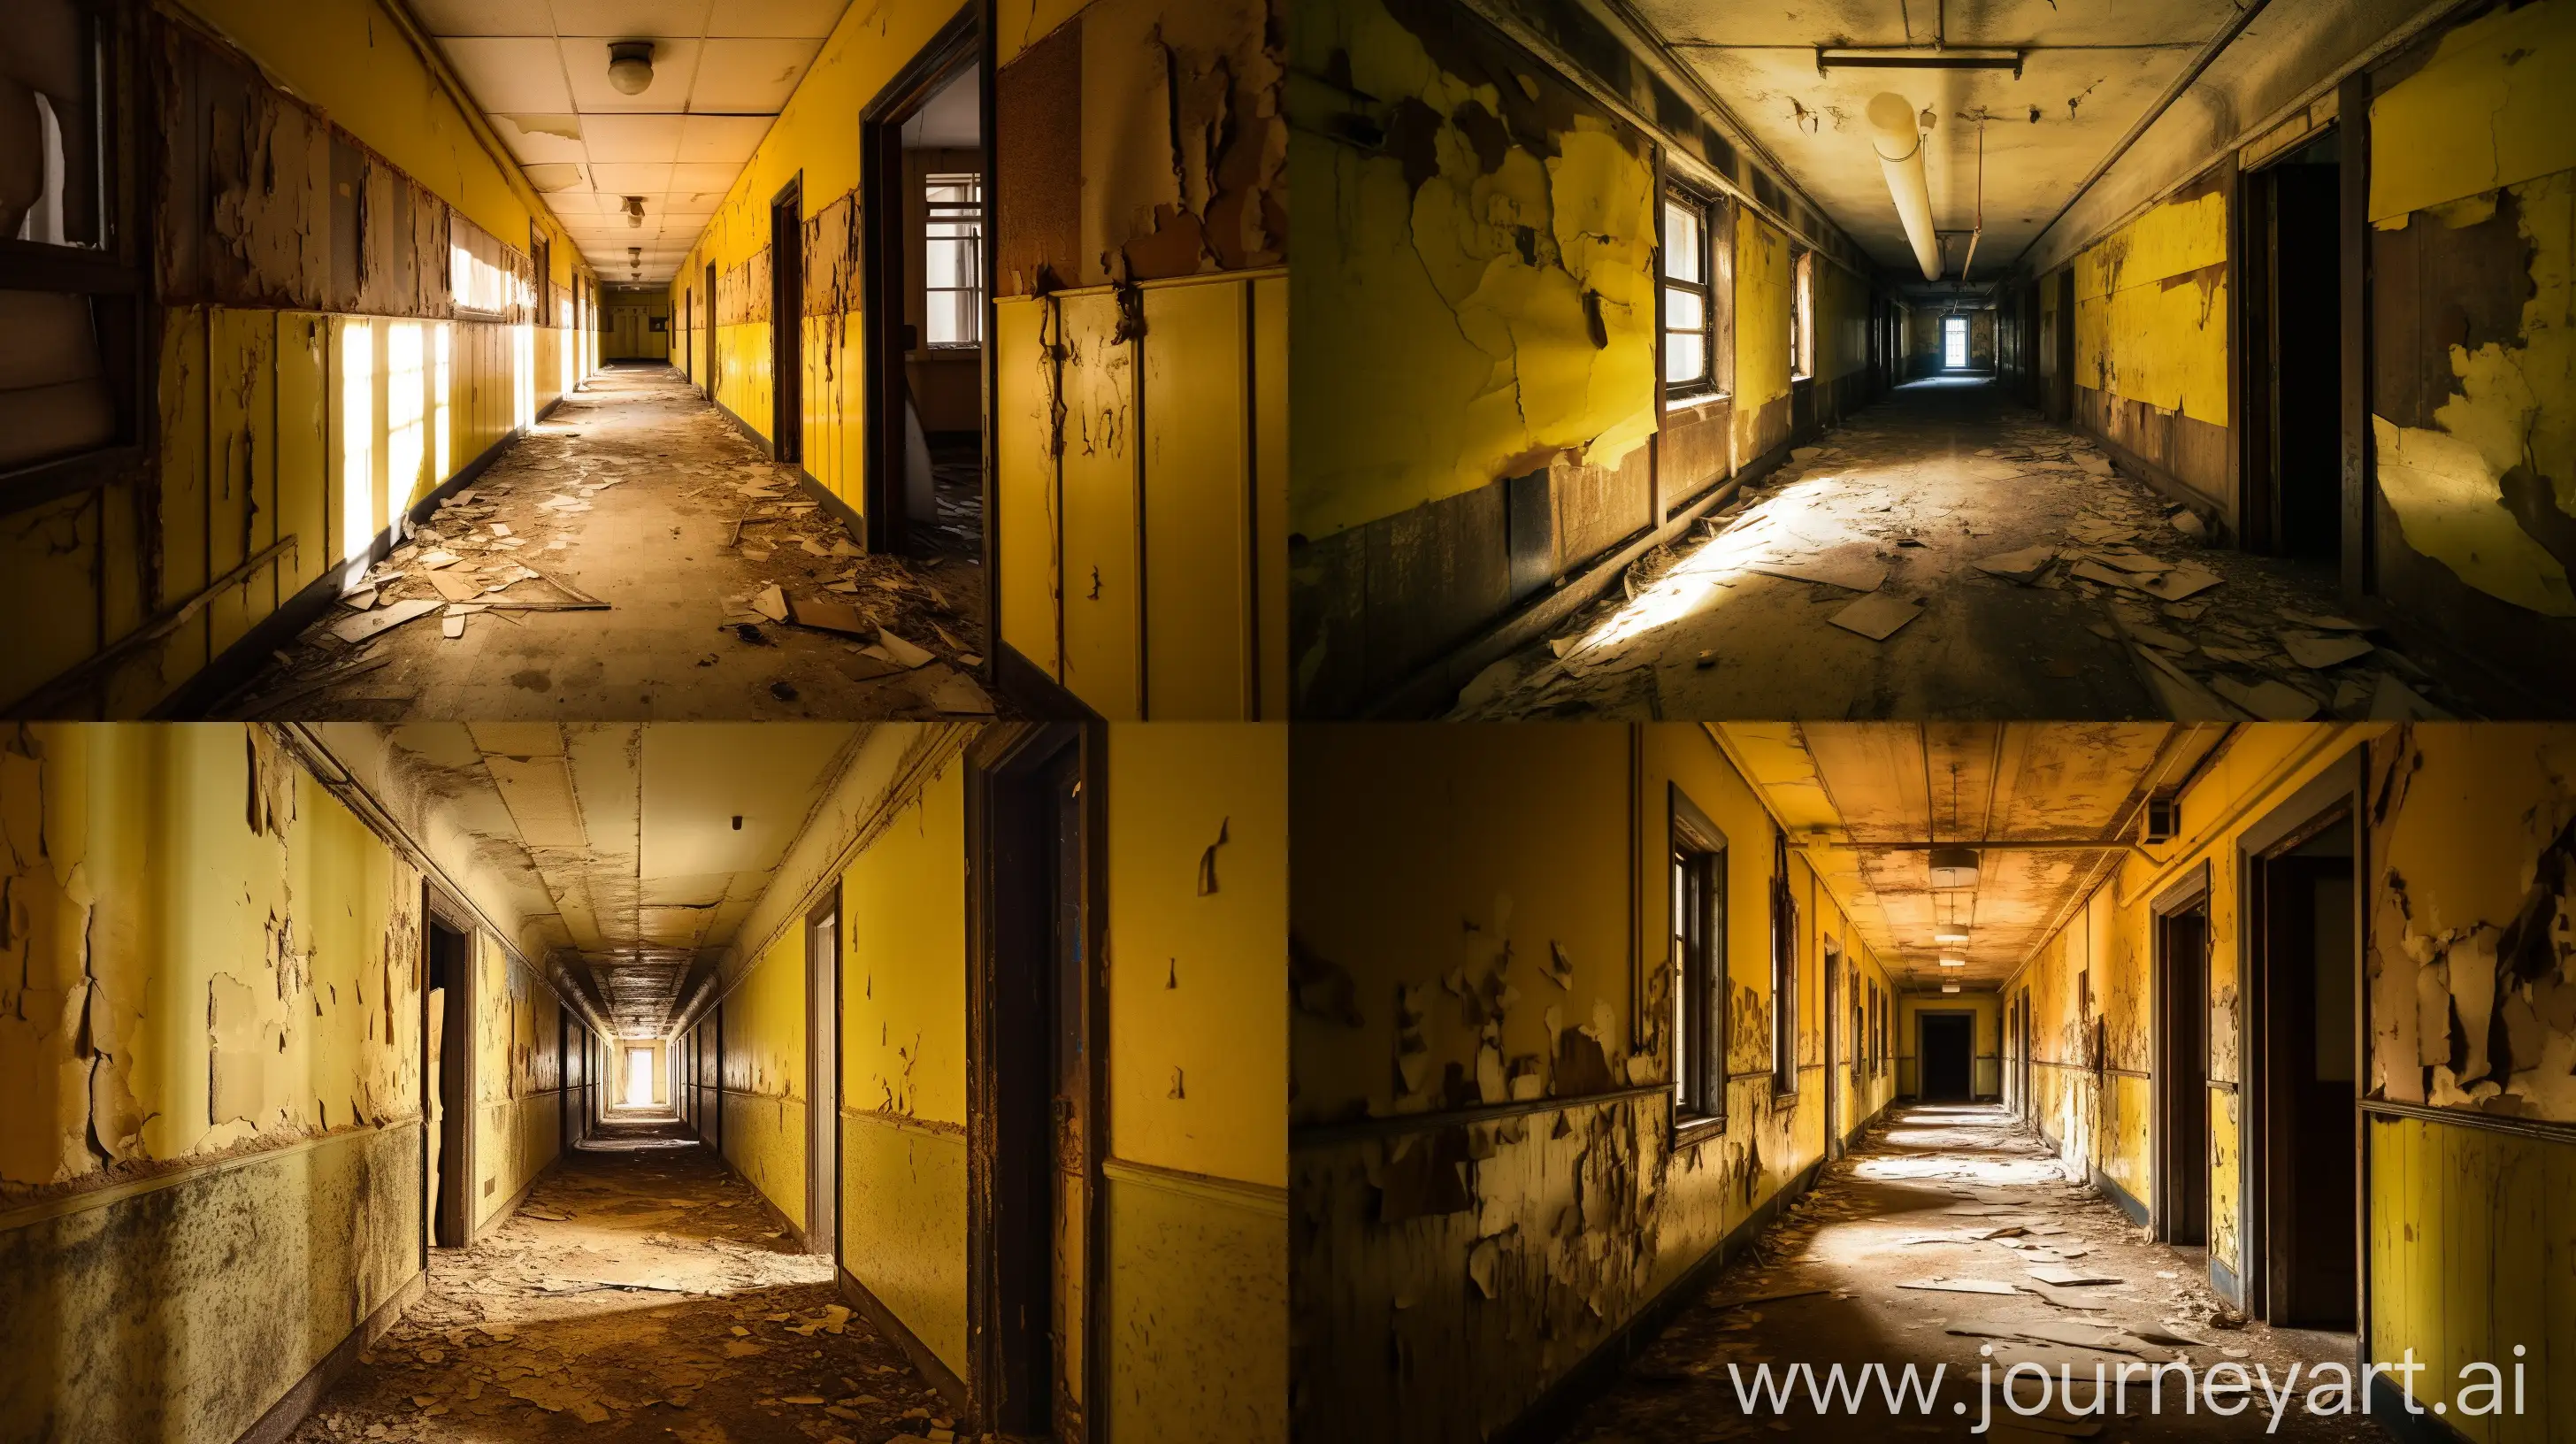 A dilapidated office hallway resembling a labyrinth, with walls painted in faded yellow, the carpet worn and stained with age, harsh fluorescent lighting casting eerie shadows, conveying a sense of abandonment and isolation, Photography, shot with a wide-angle lens to capture the entire hallway, --ar 16:9 --v 5